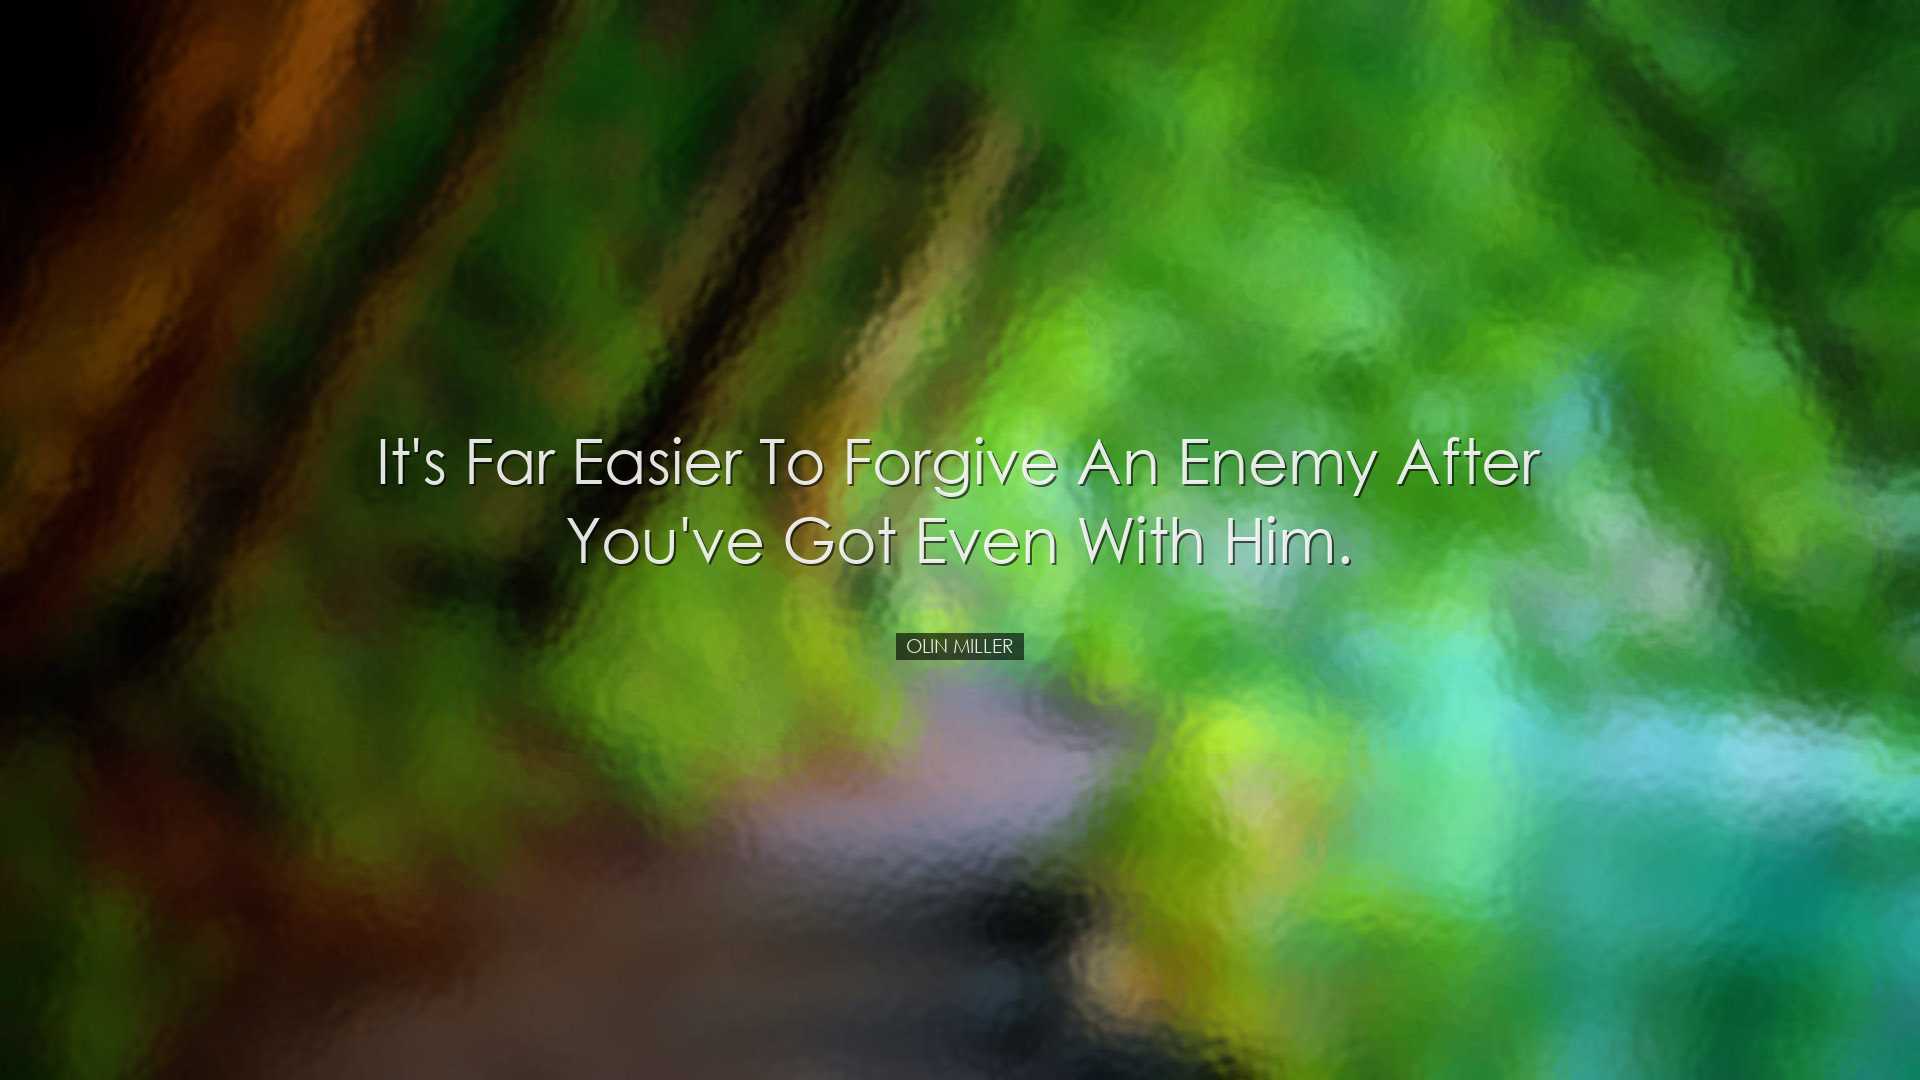 It's far easier to forgive an enemy after you've got even with him